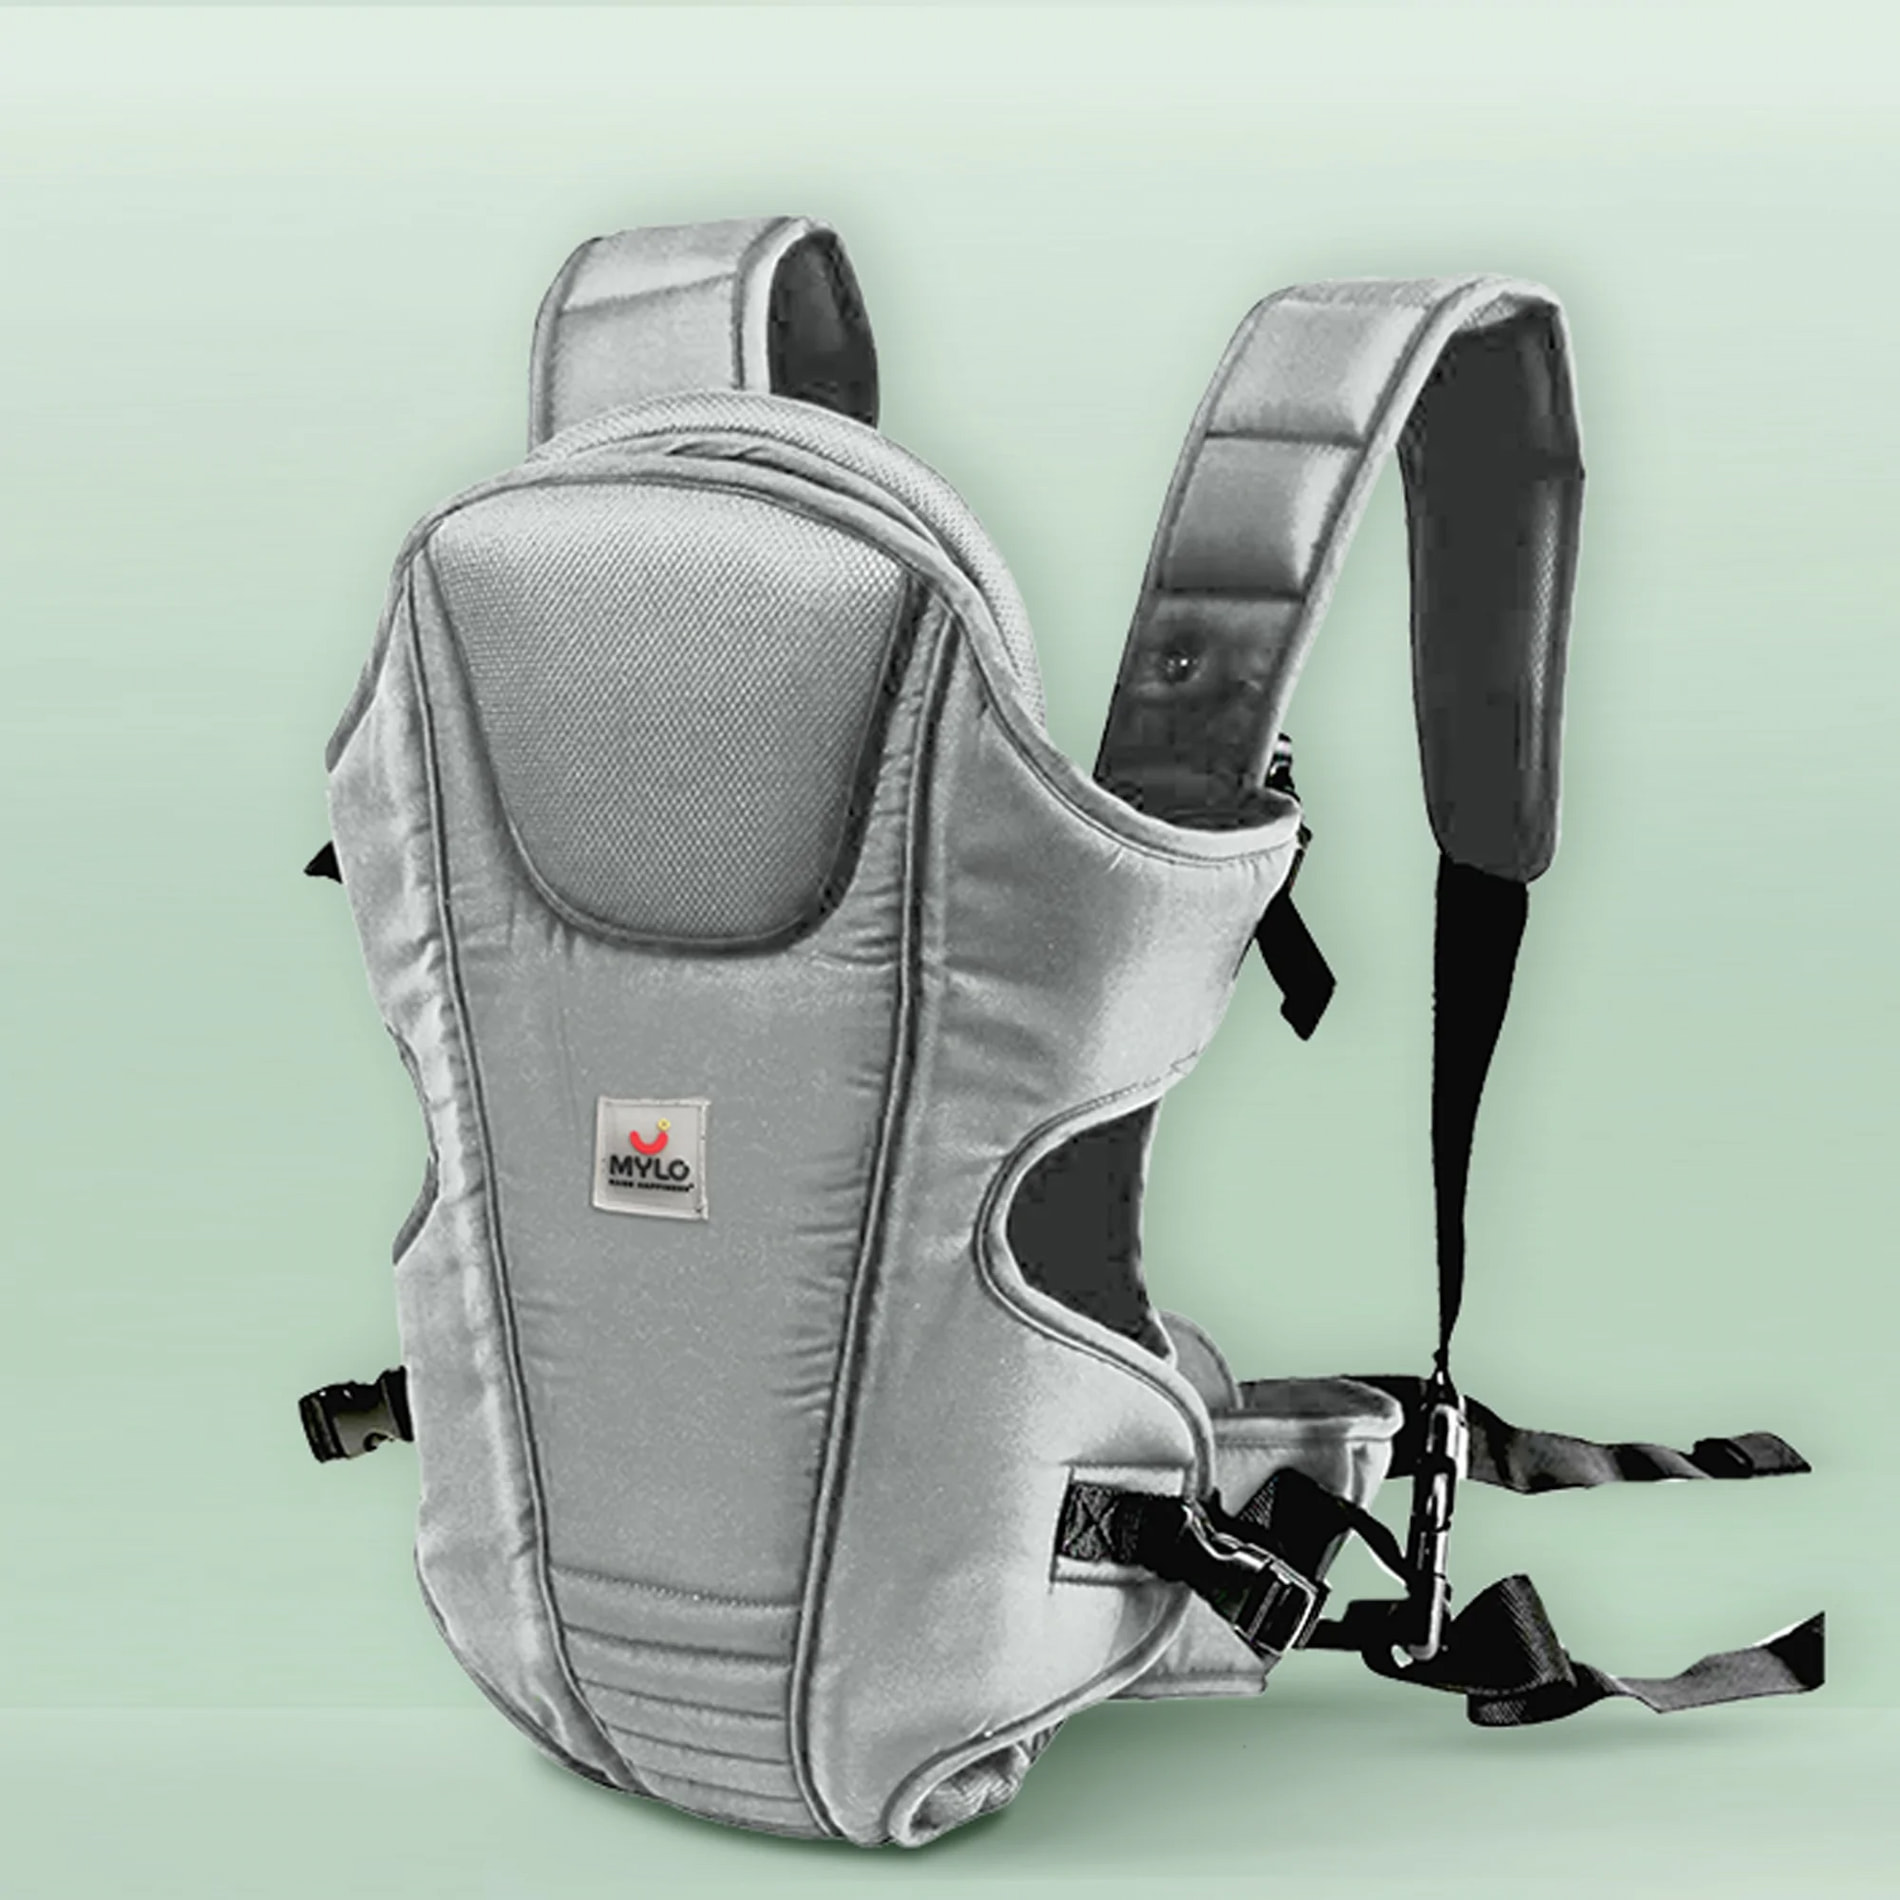 Baby Carrier Bag for 6 to 15 Months | 3 Carrying Positions | Adjustable & Durable Shoulder Straps | Soft Cushioning Near Headrest | Grey